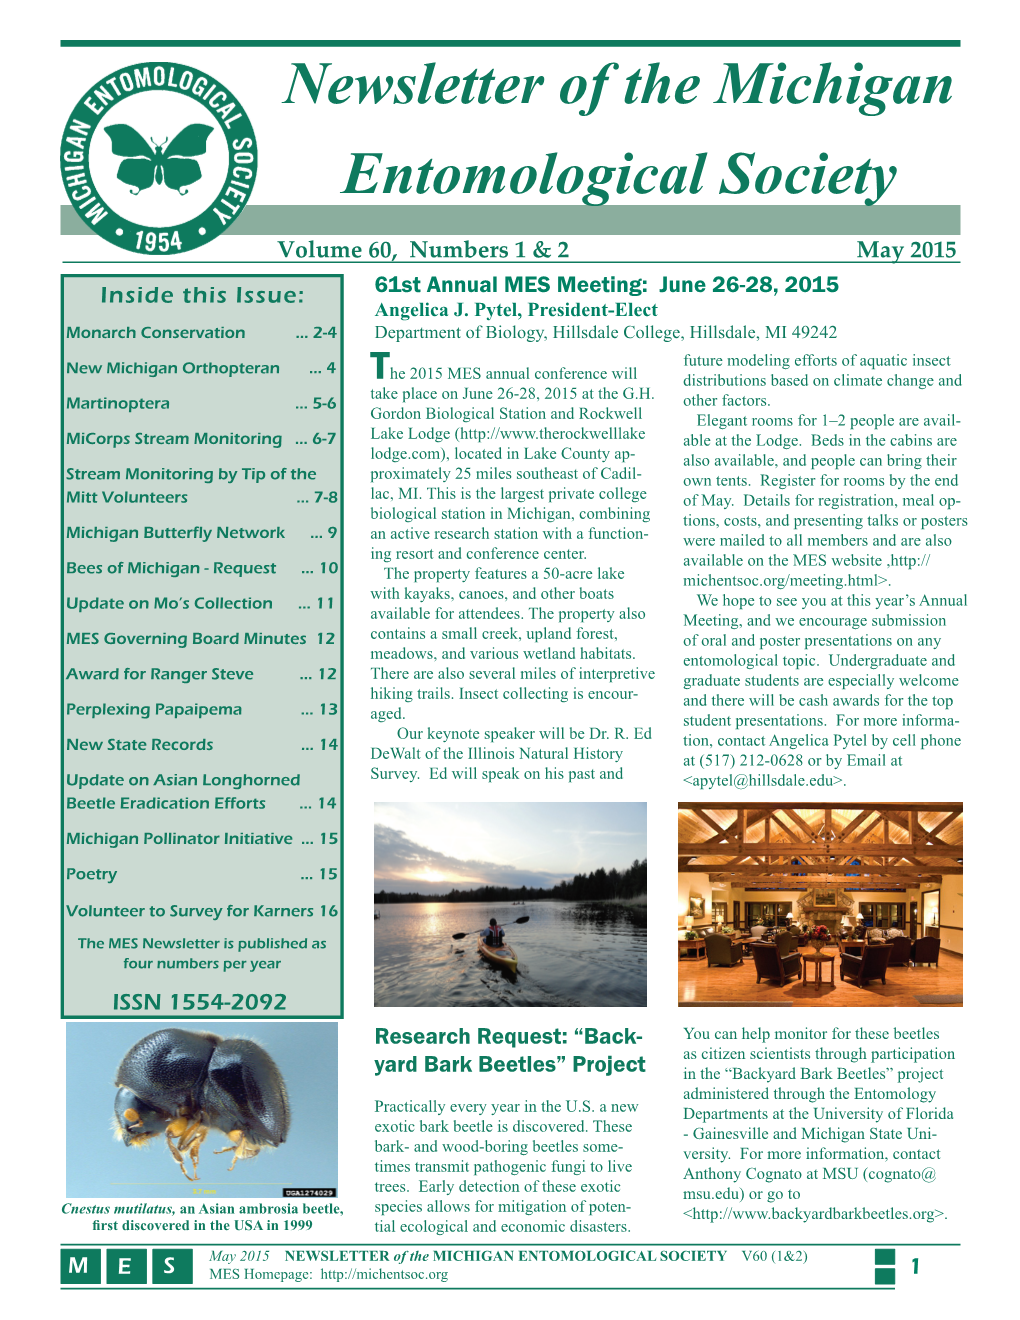 Newsletter of the Michigan Entomological Society